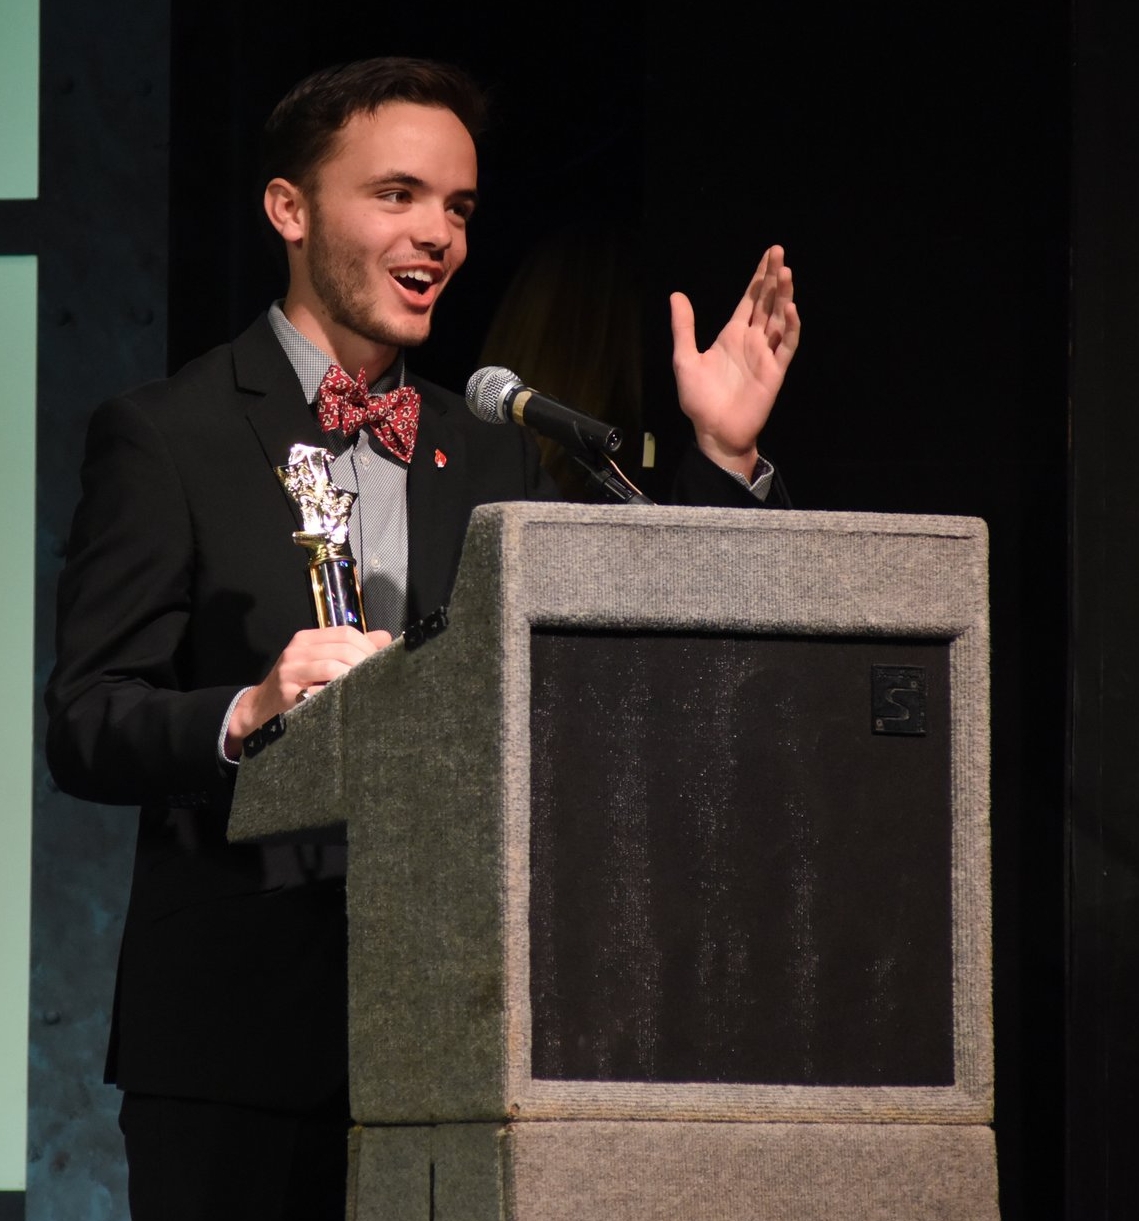   Aidan Mallon, of Hills East, won “Best Actor in a Play” for his role as Rev. Hale in “The Crucible.”  